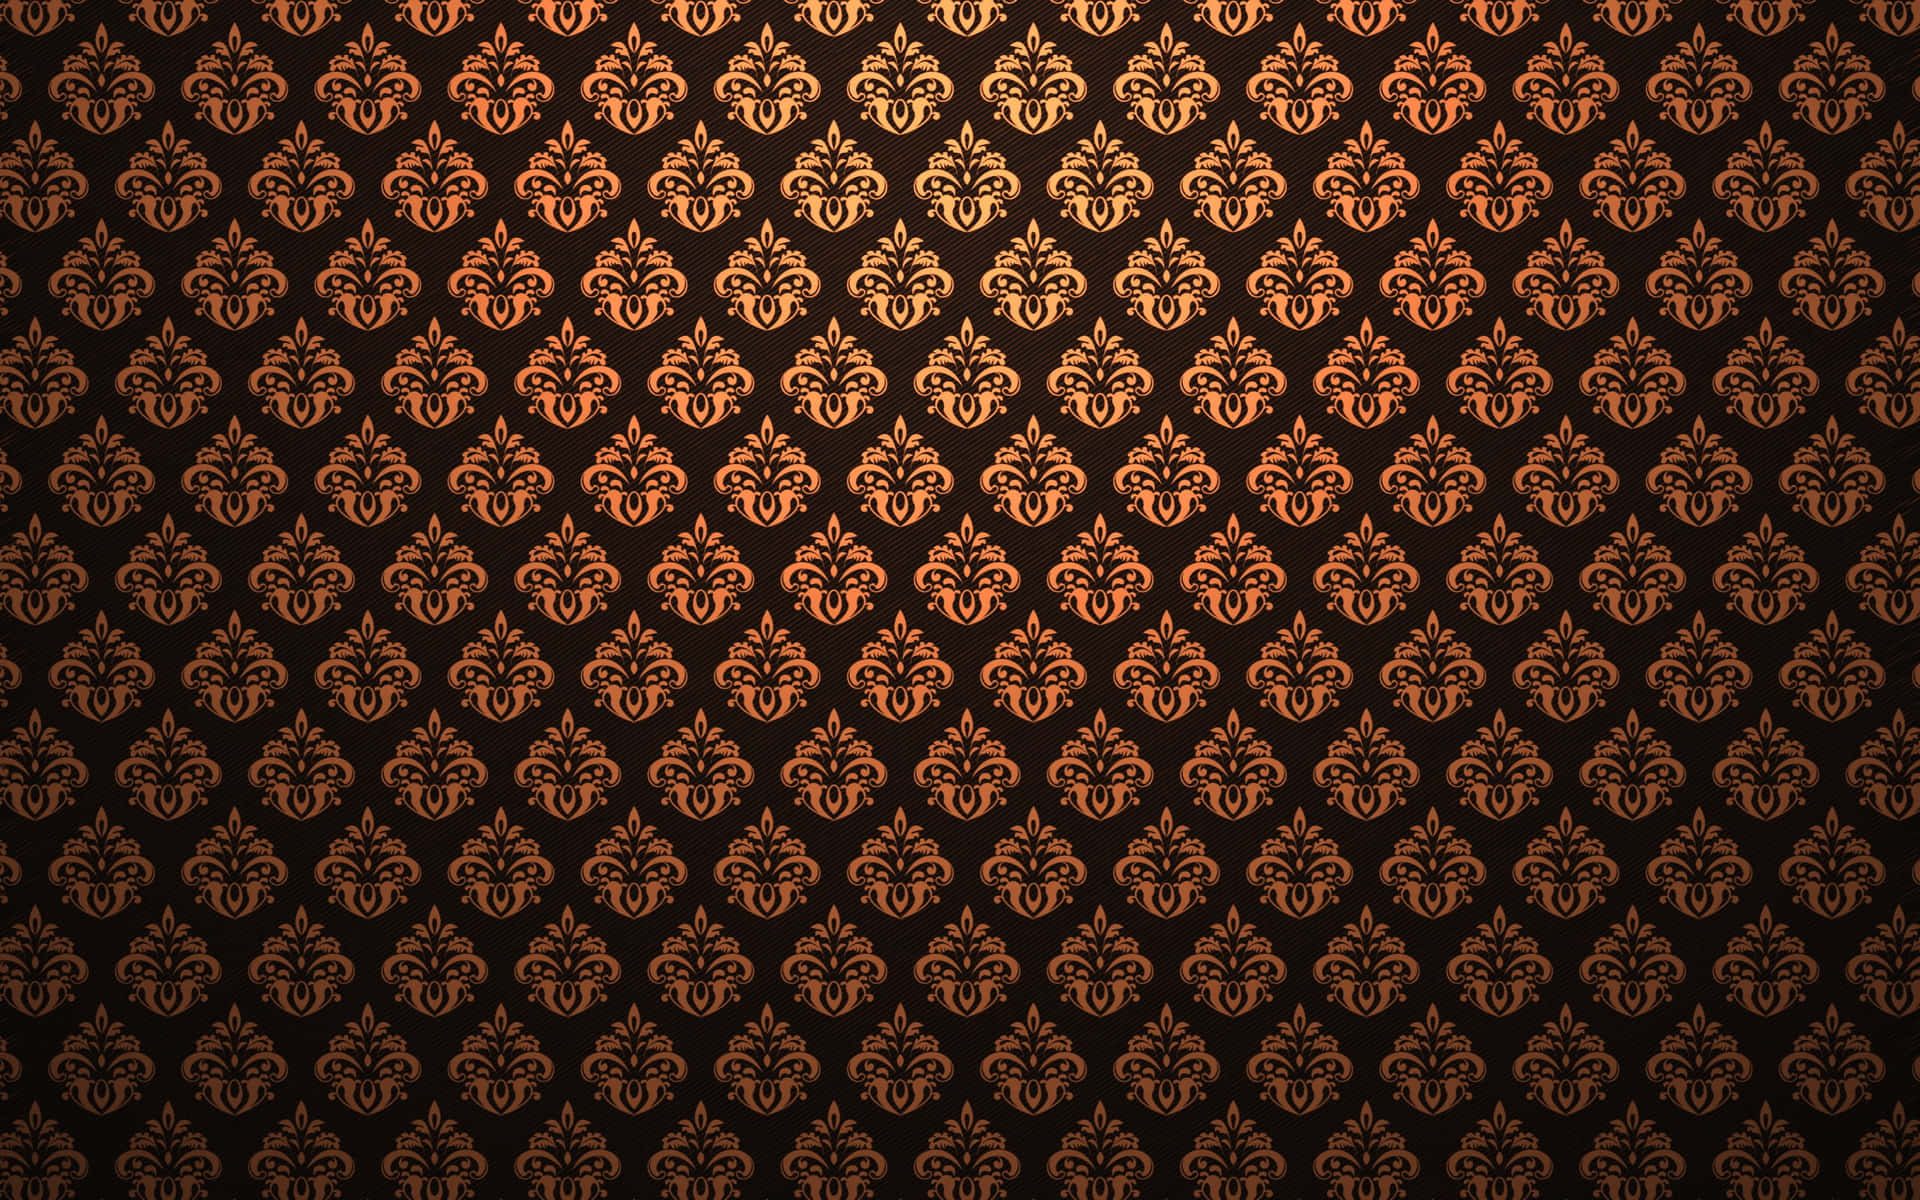 An Ornate Wallpaper With An Orange And Black Pattern